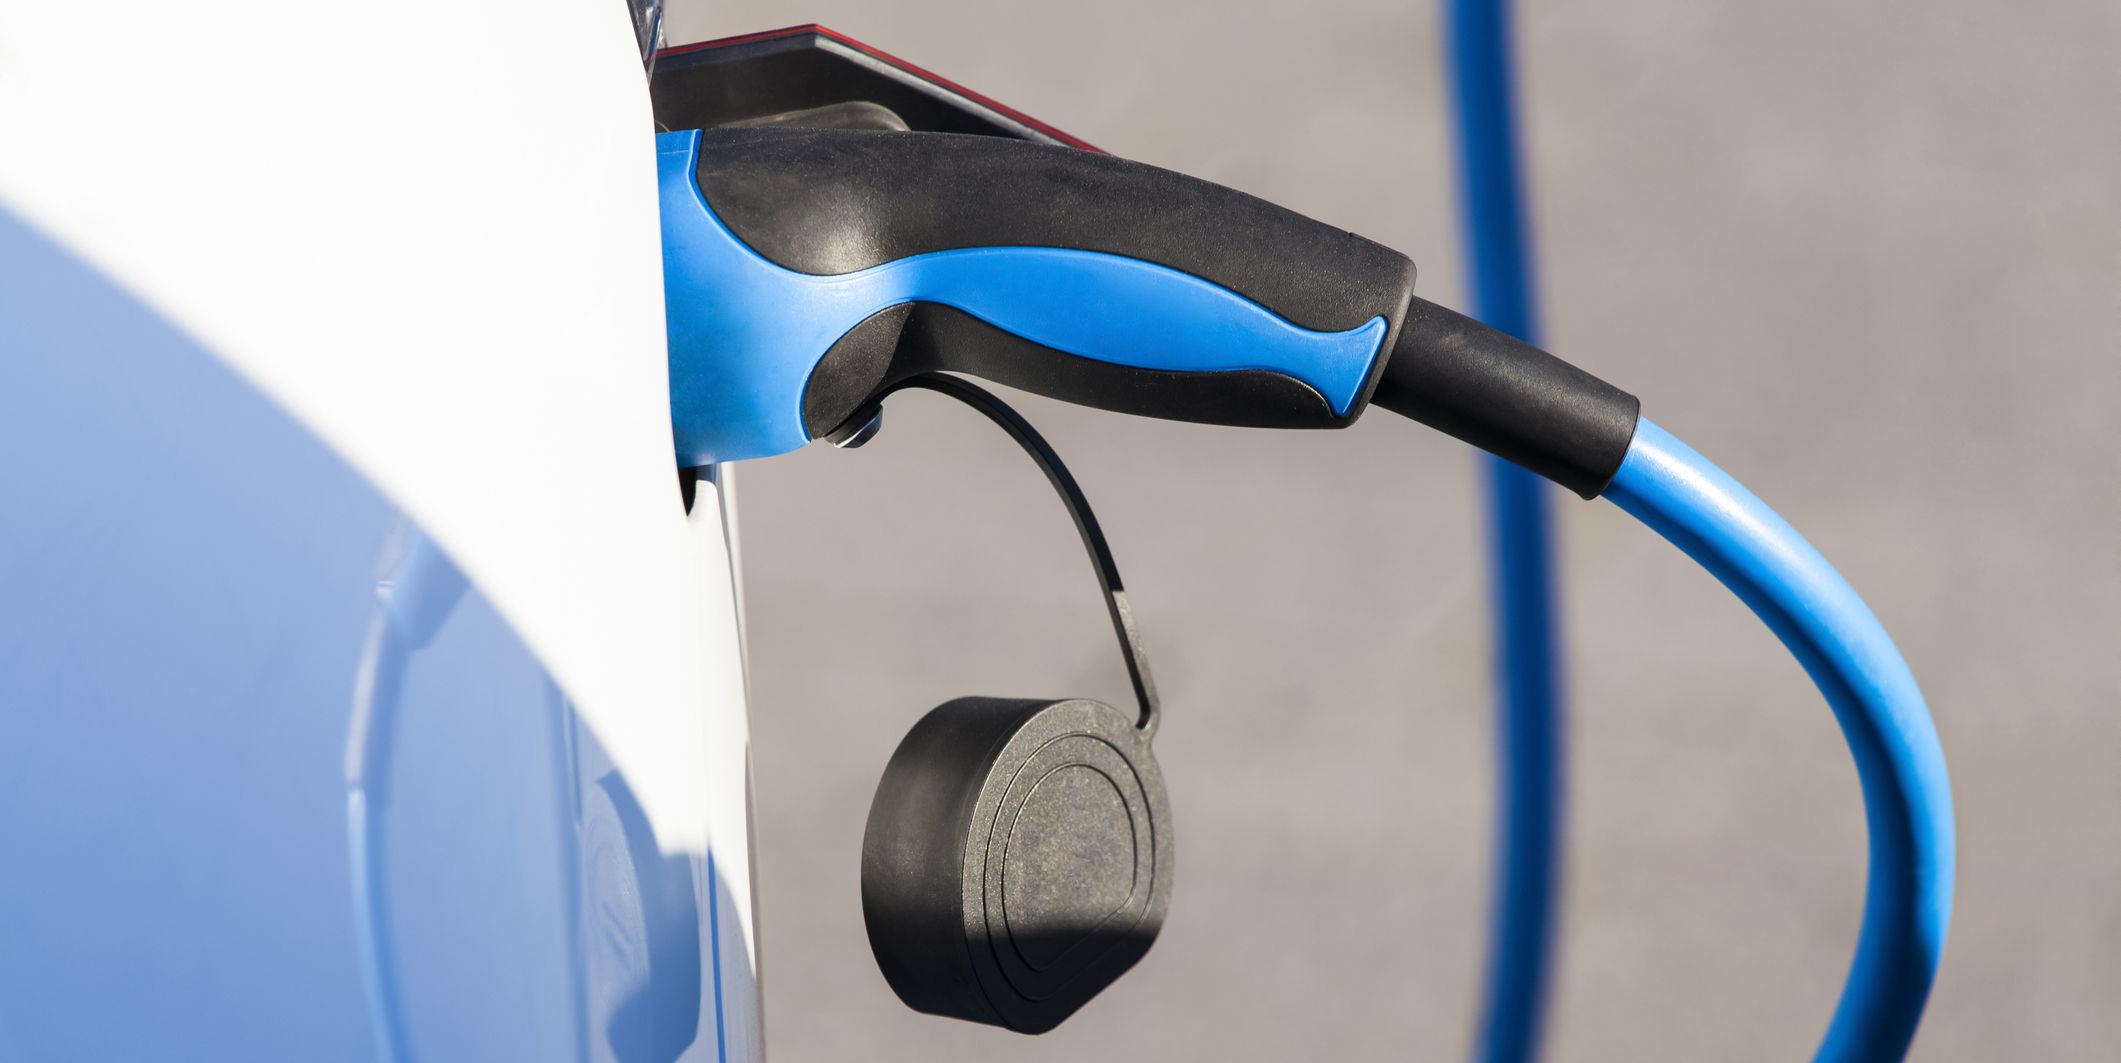 We Tested 5 Home EV Chargers for 2022